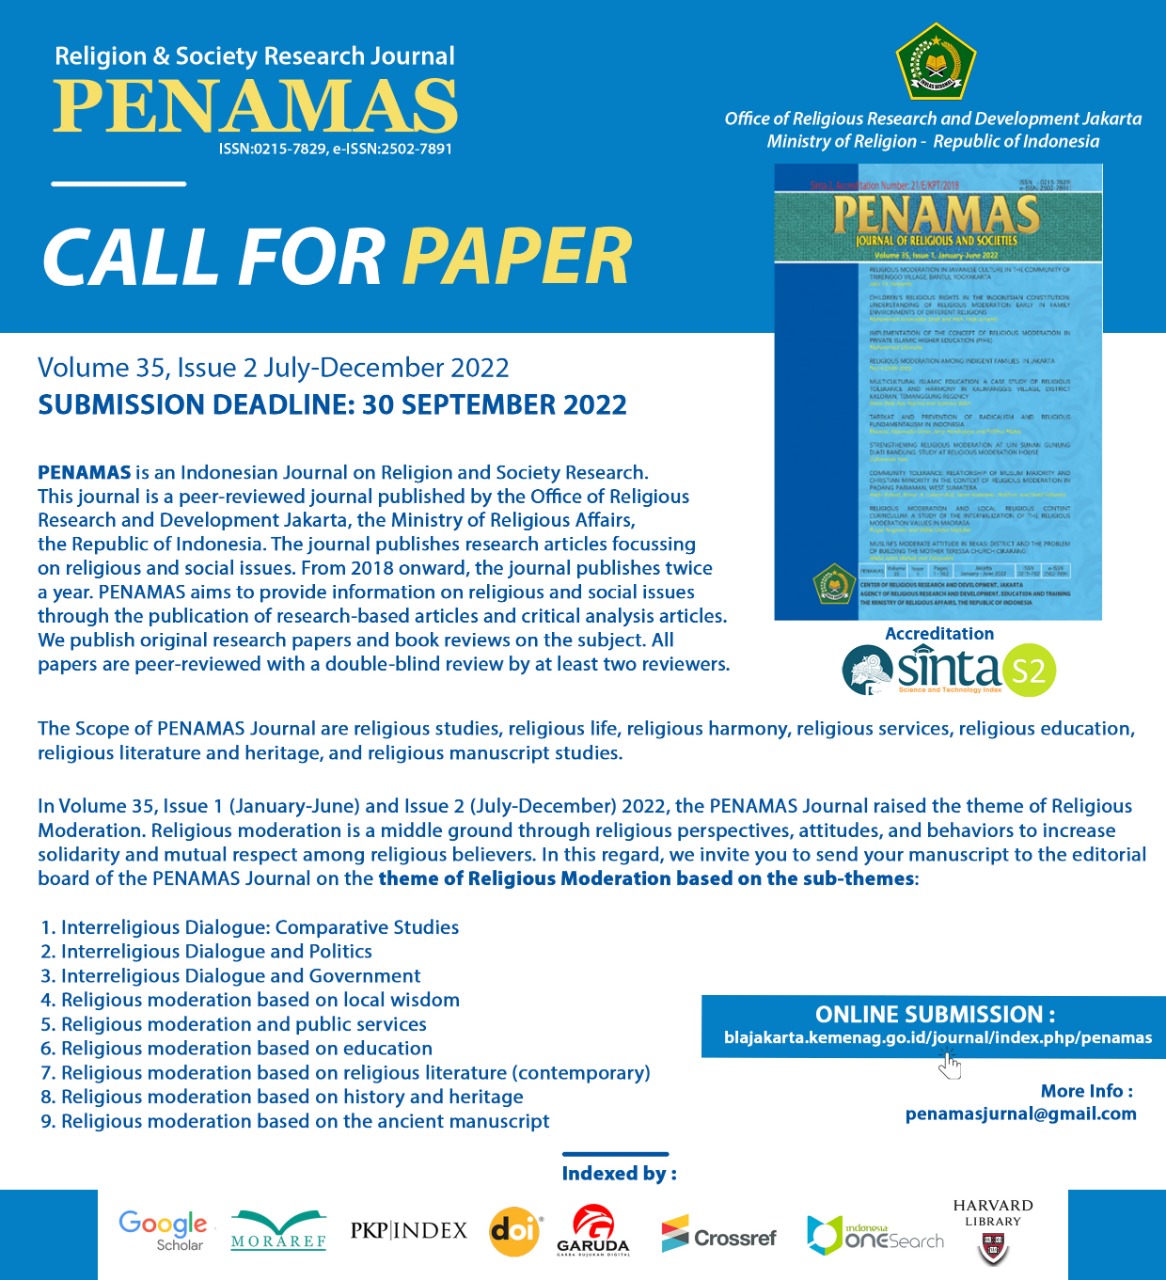 CALL FOR PAPERS  PENAMAS Journal : Volume 35, Issue 2 July-December 2022